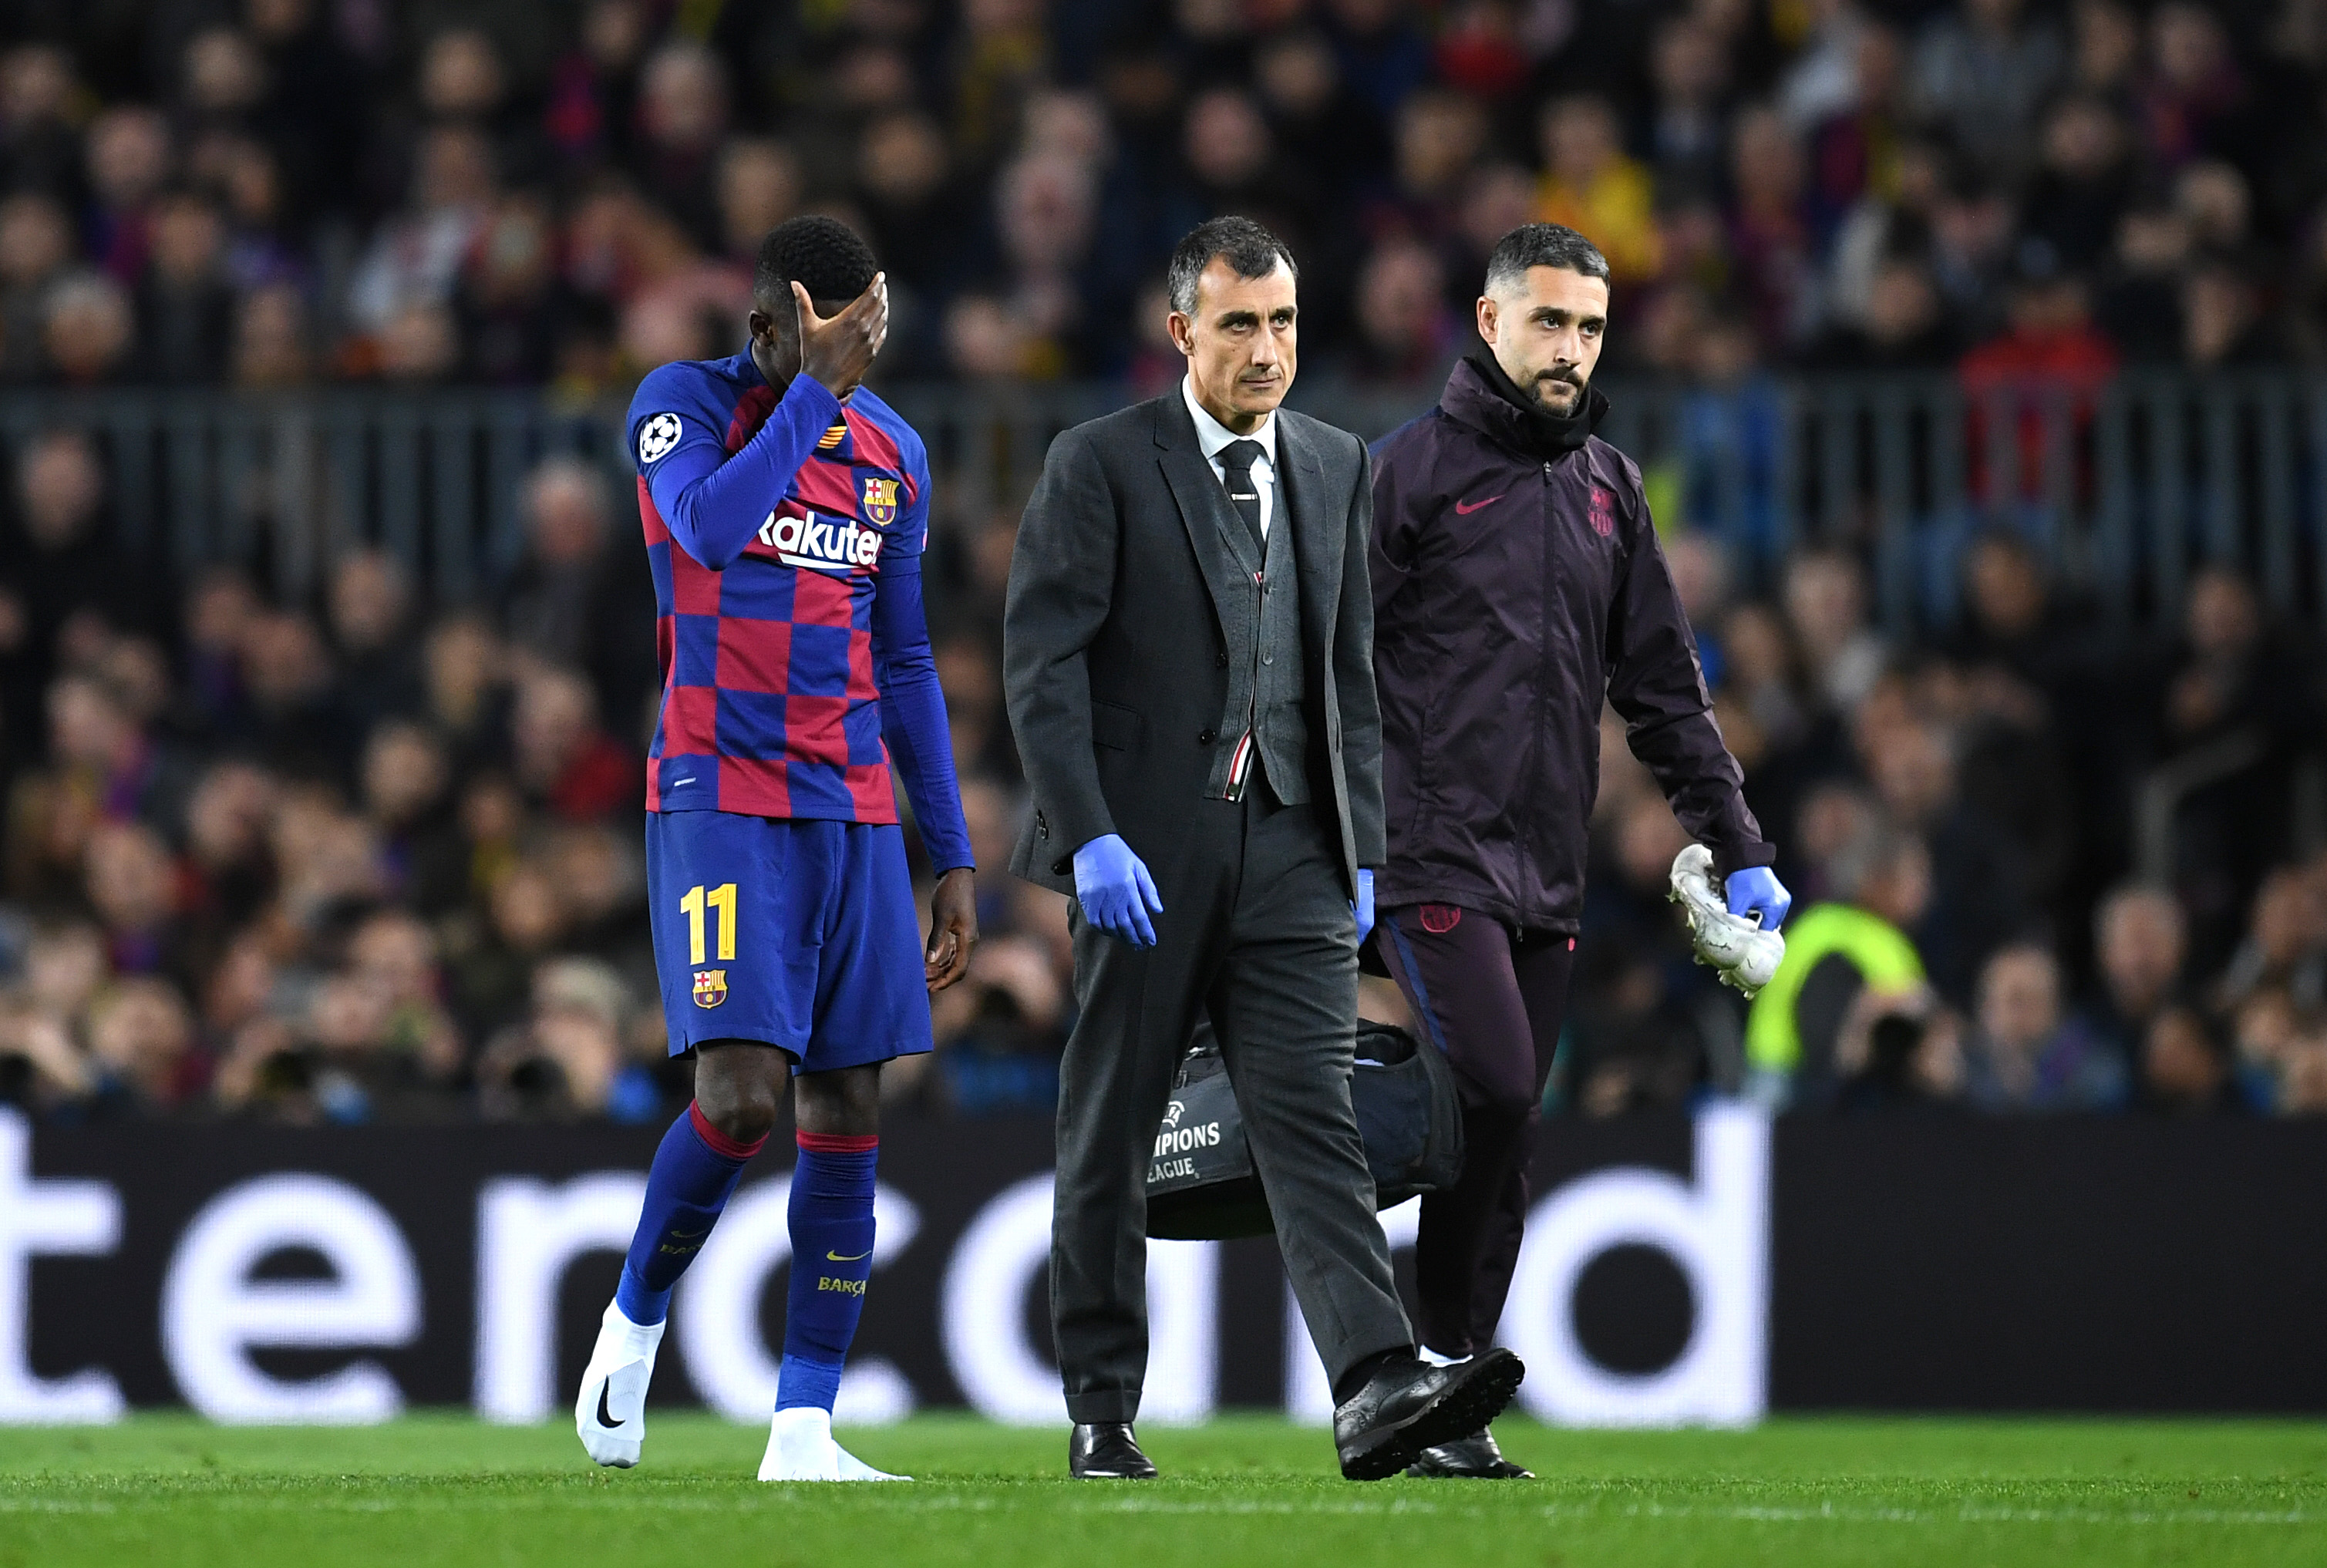 Injuries have hampered Dembele at Barcelona a great deal. (Photo by David Ramos/Getty Images)